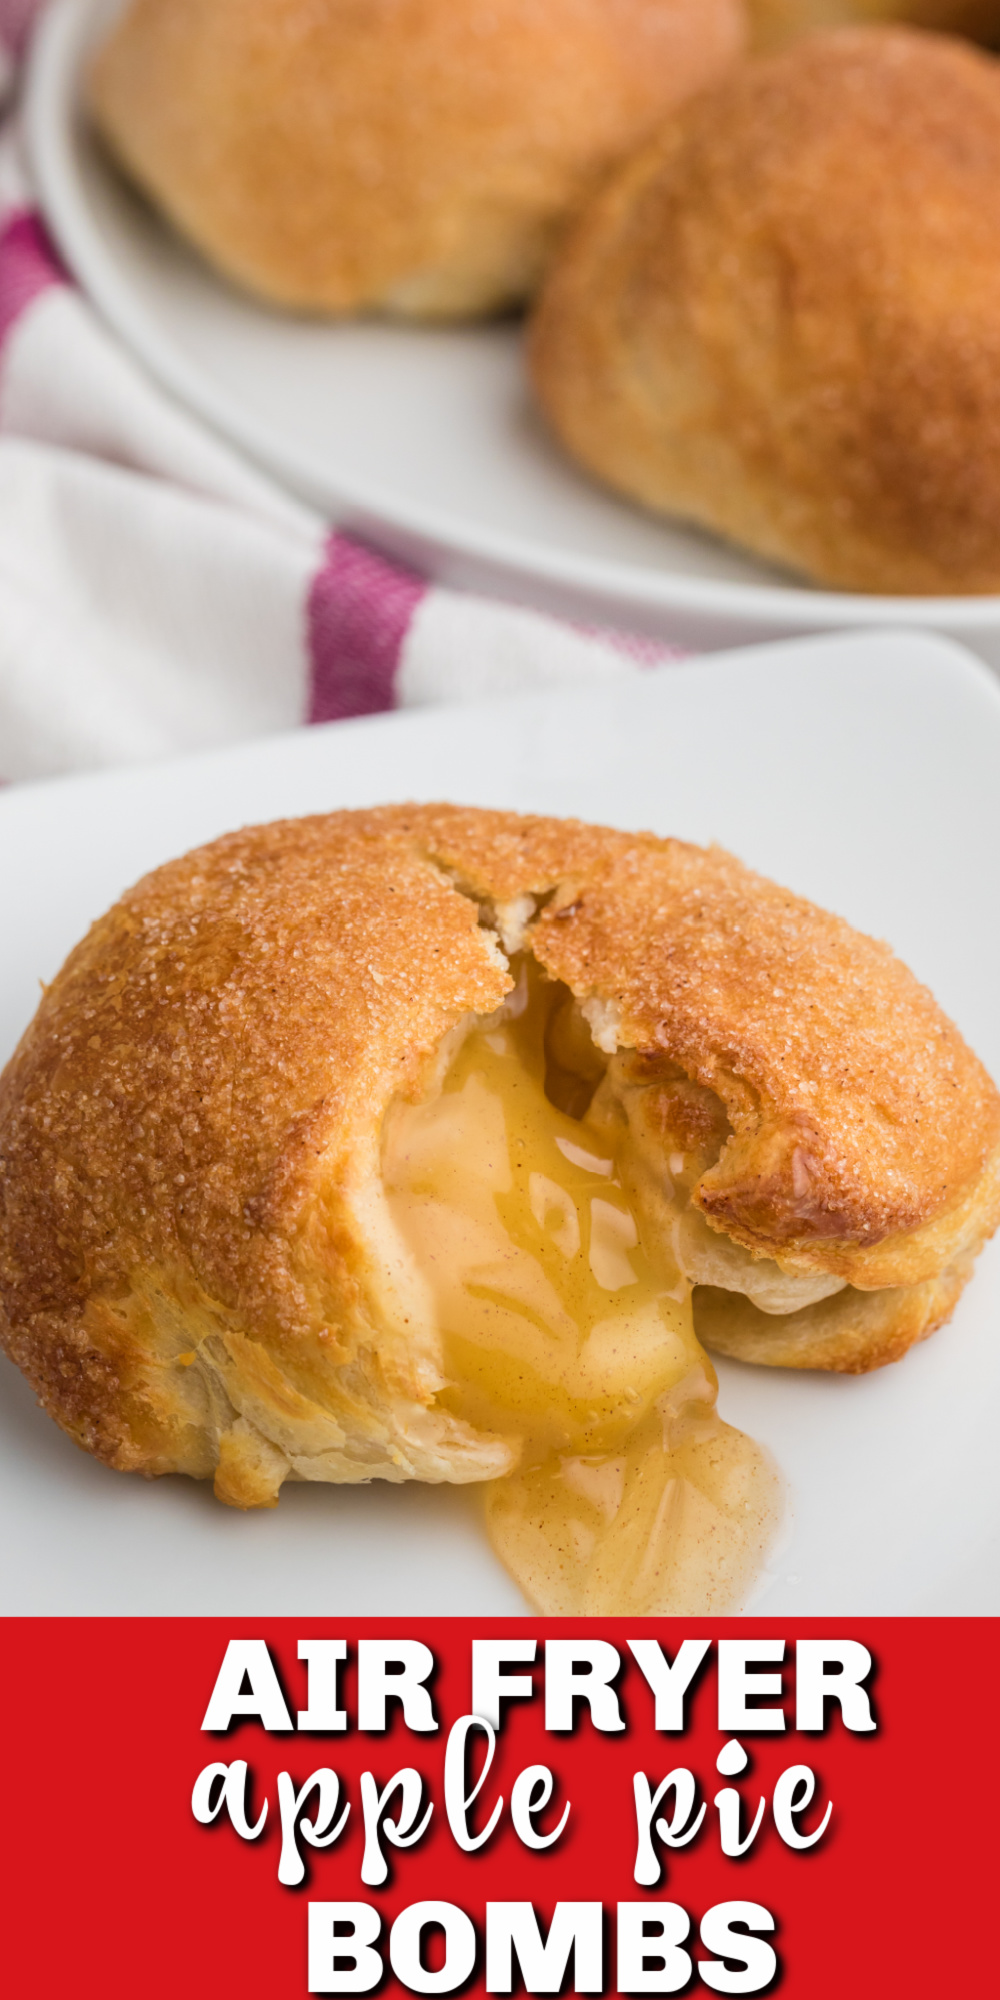 Just when you thought that you've made it all, along comes this simple recipe for Air Fryer Apple Pie Bombs. They're a fast and easy treat that is loaded down with flavor. They literally just take four ingredients to make as well!